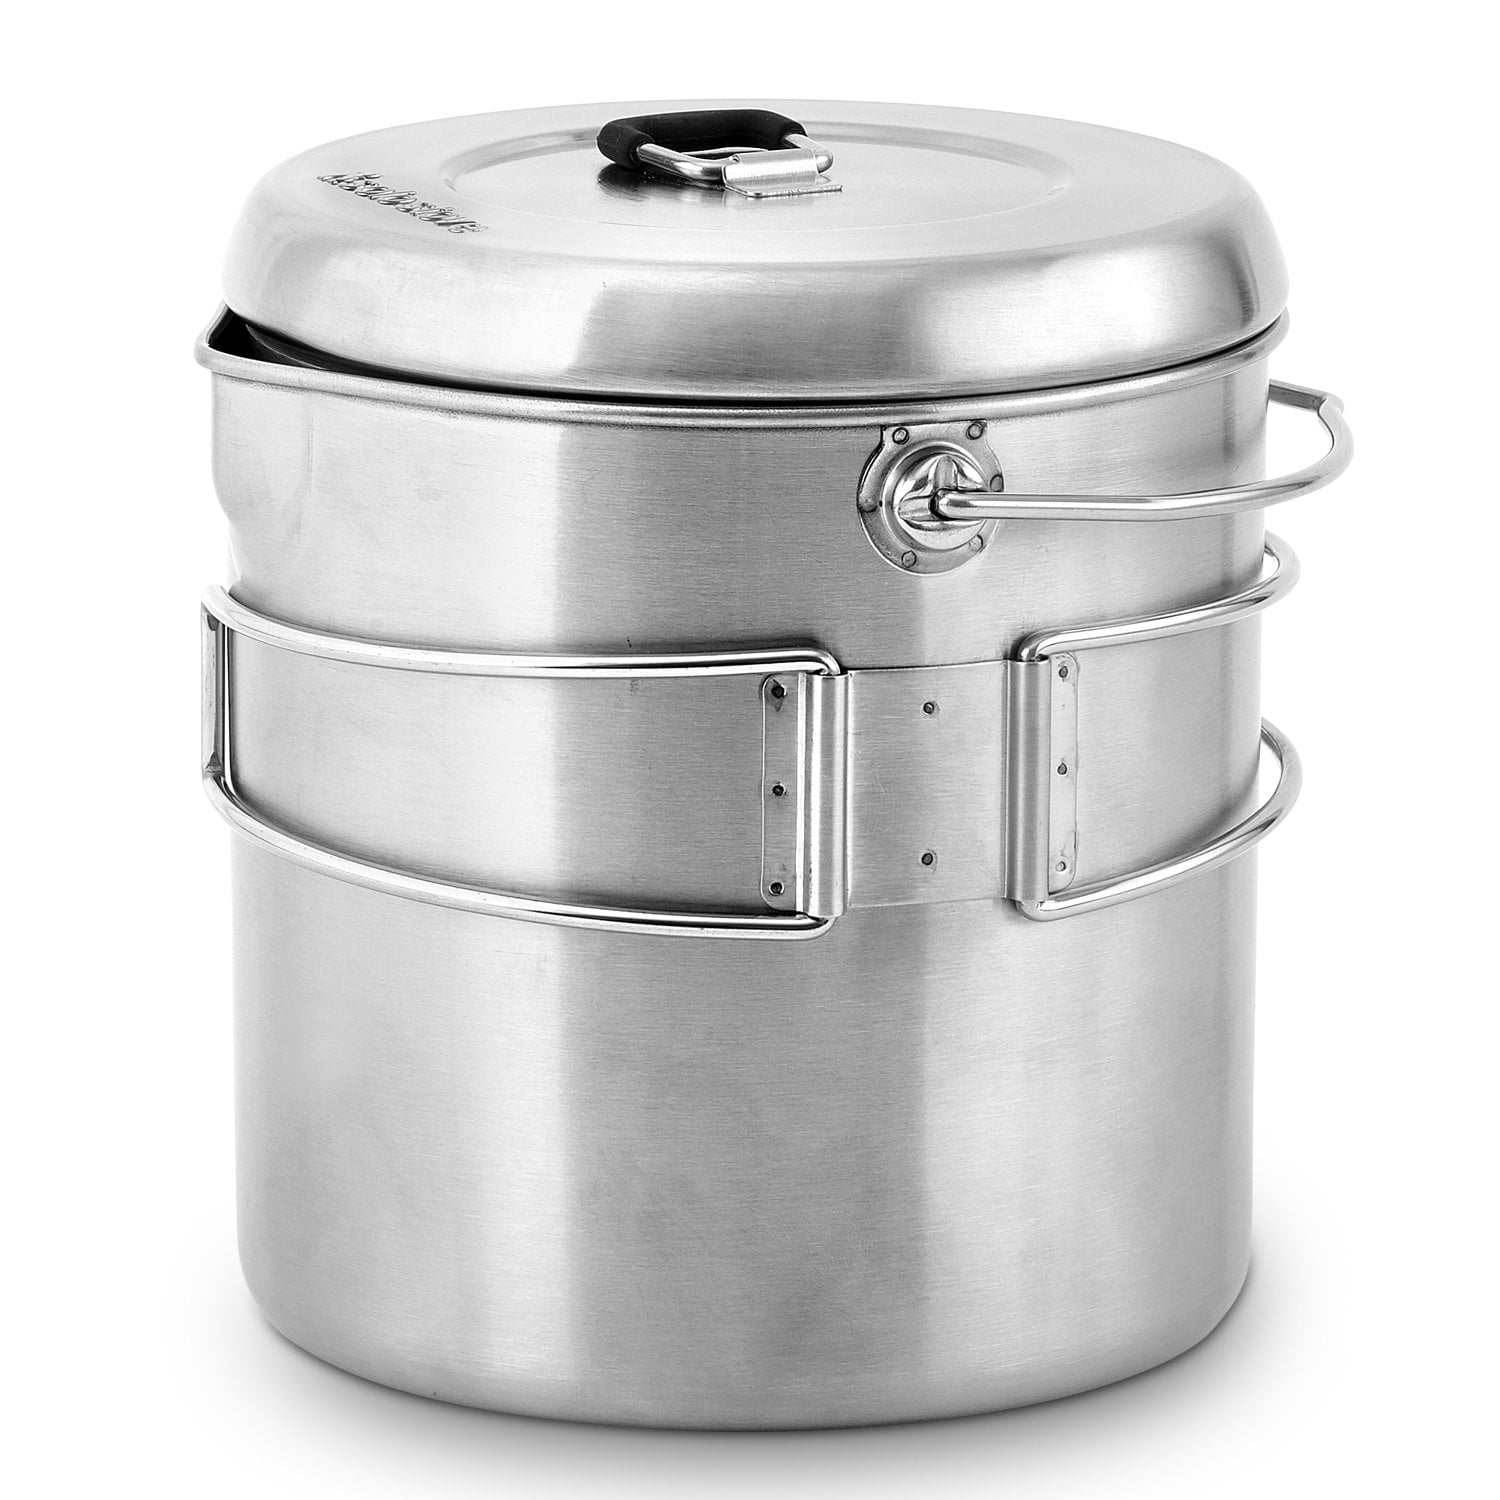  CanCooker Original 4 Gallon Edition , Convection Steam Cooker  Feeds up to 20: Pressure Cookers: Home & Kitchen